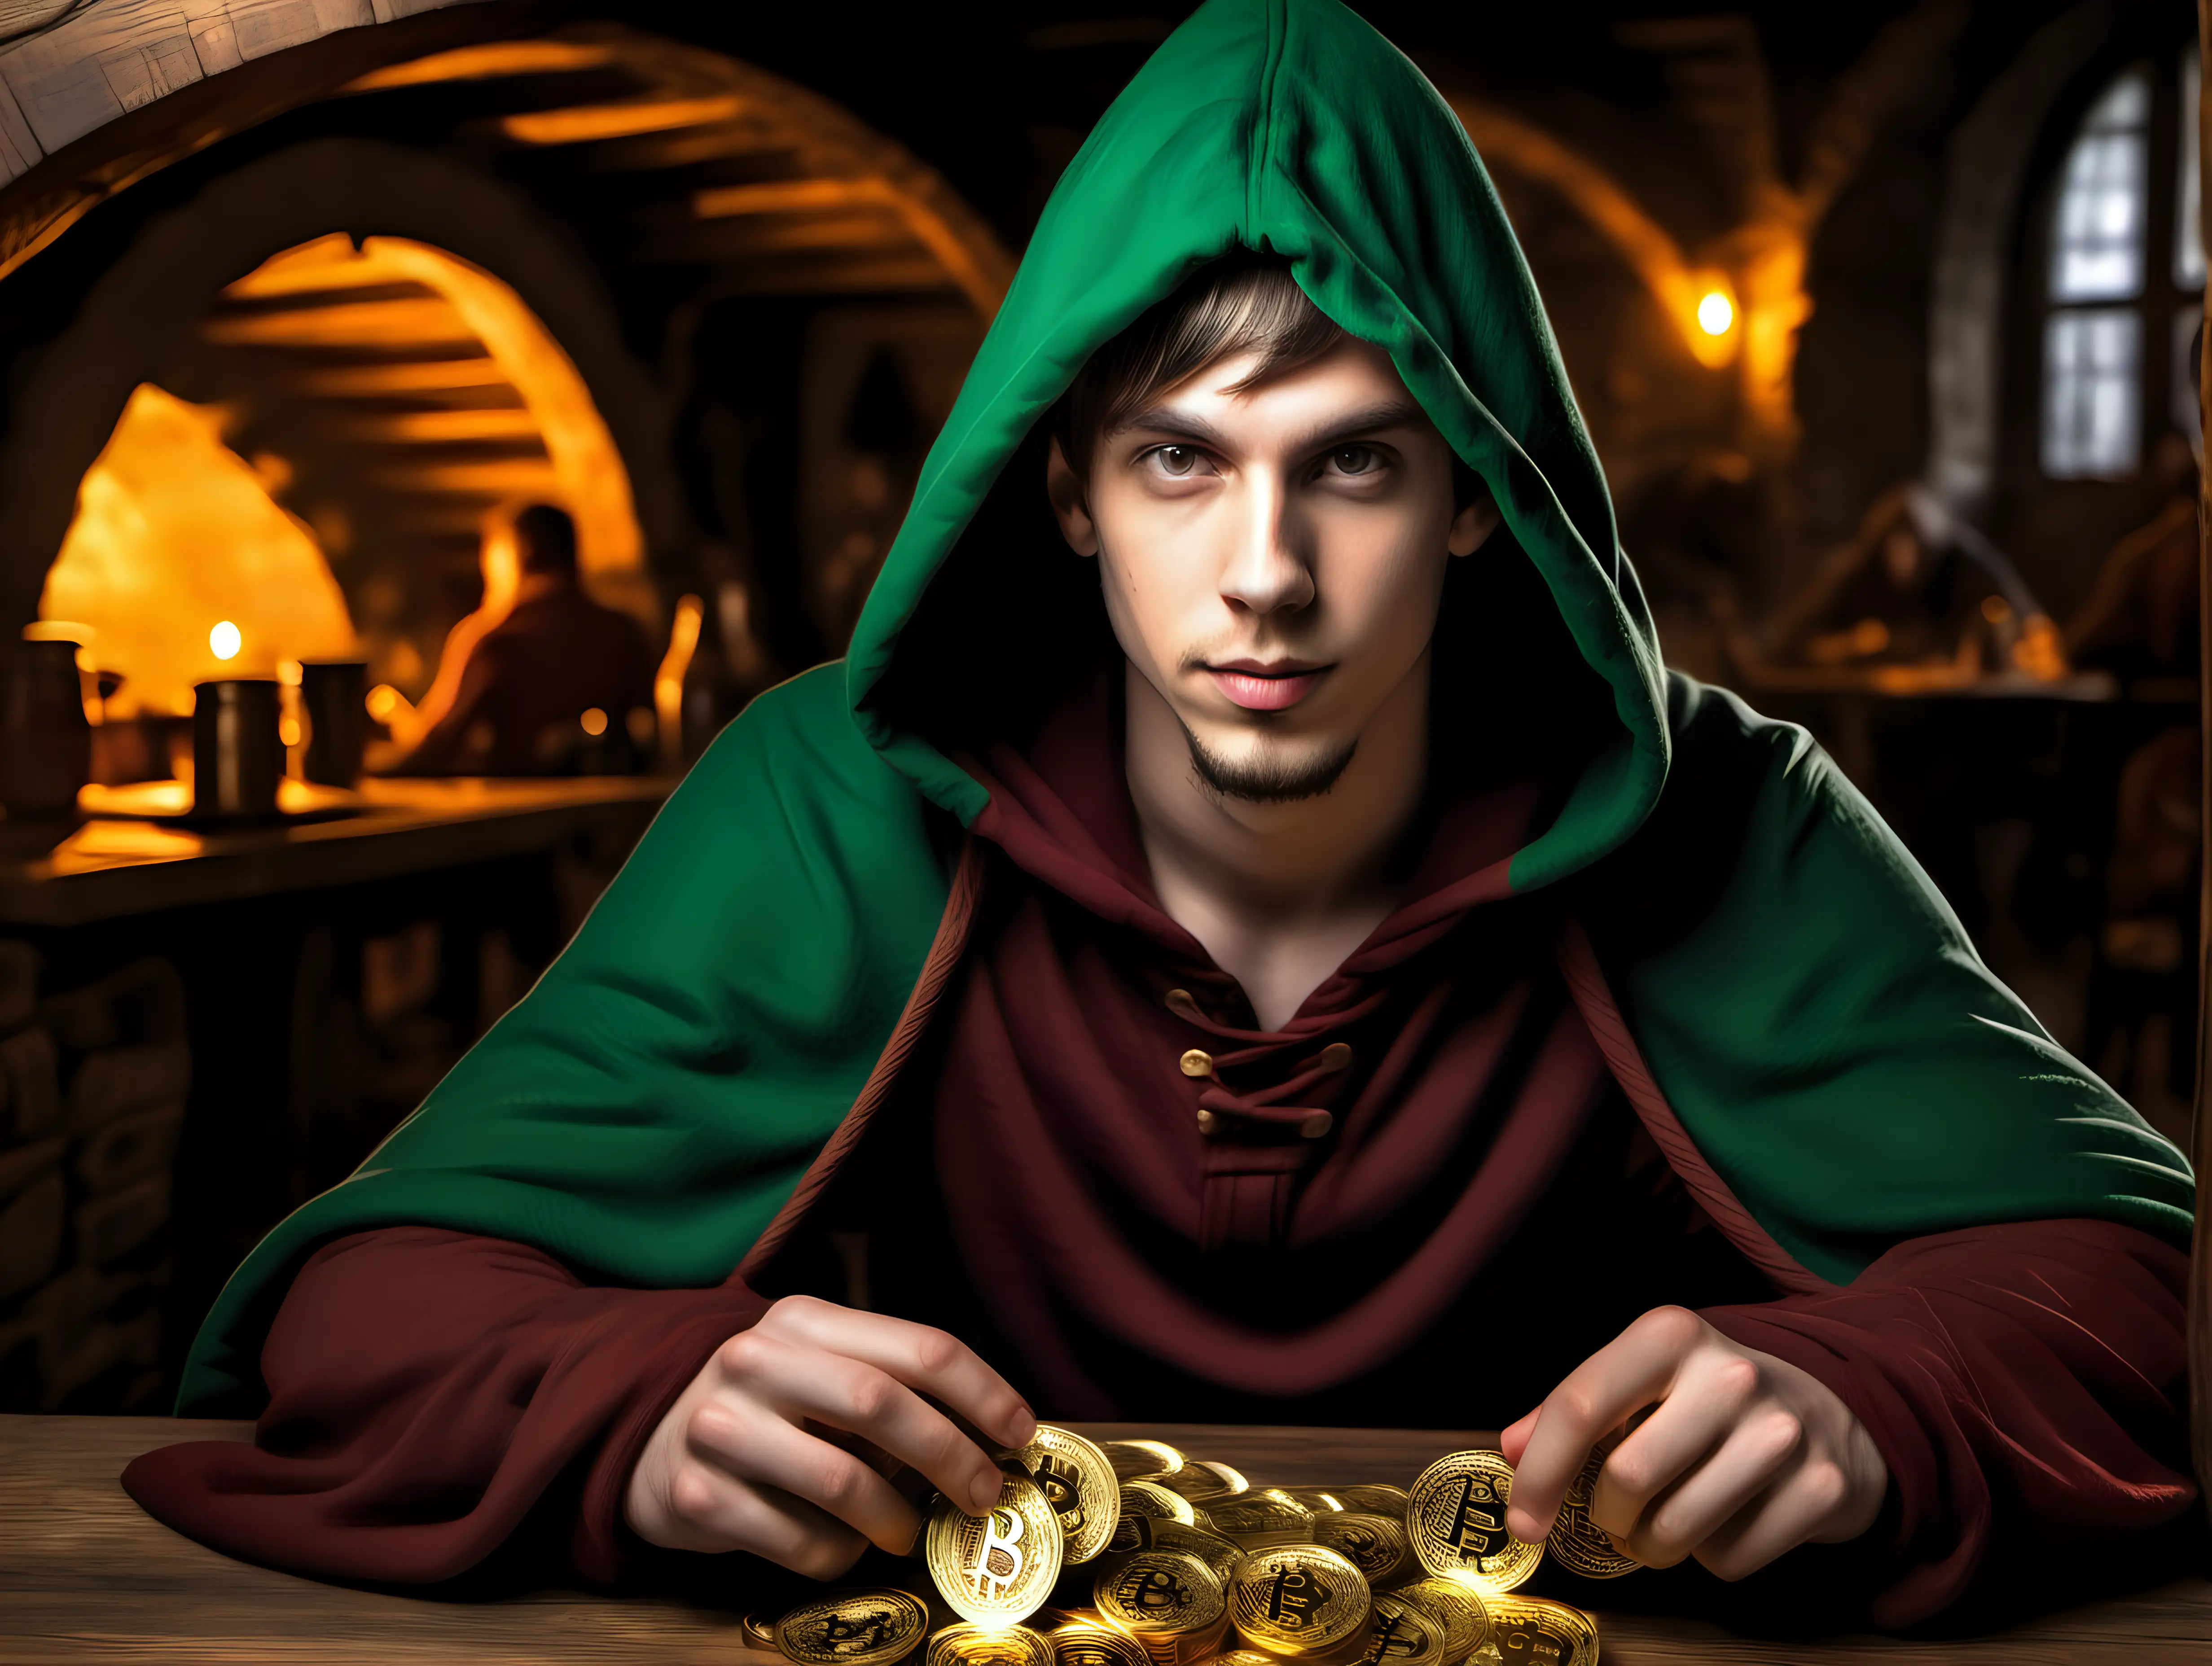 Mysterious HalfElf Gambler in Medieval Tavern with Bitcoin Wager